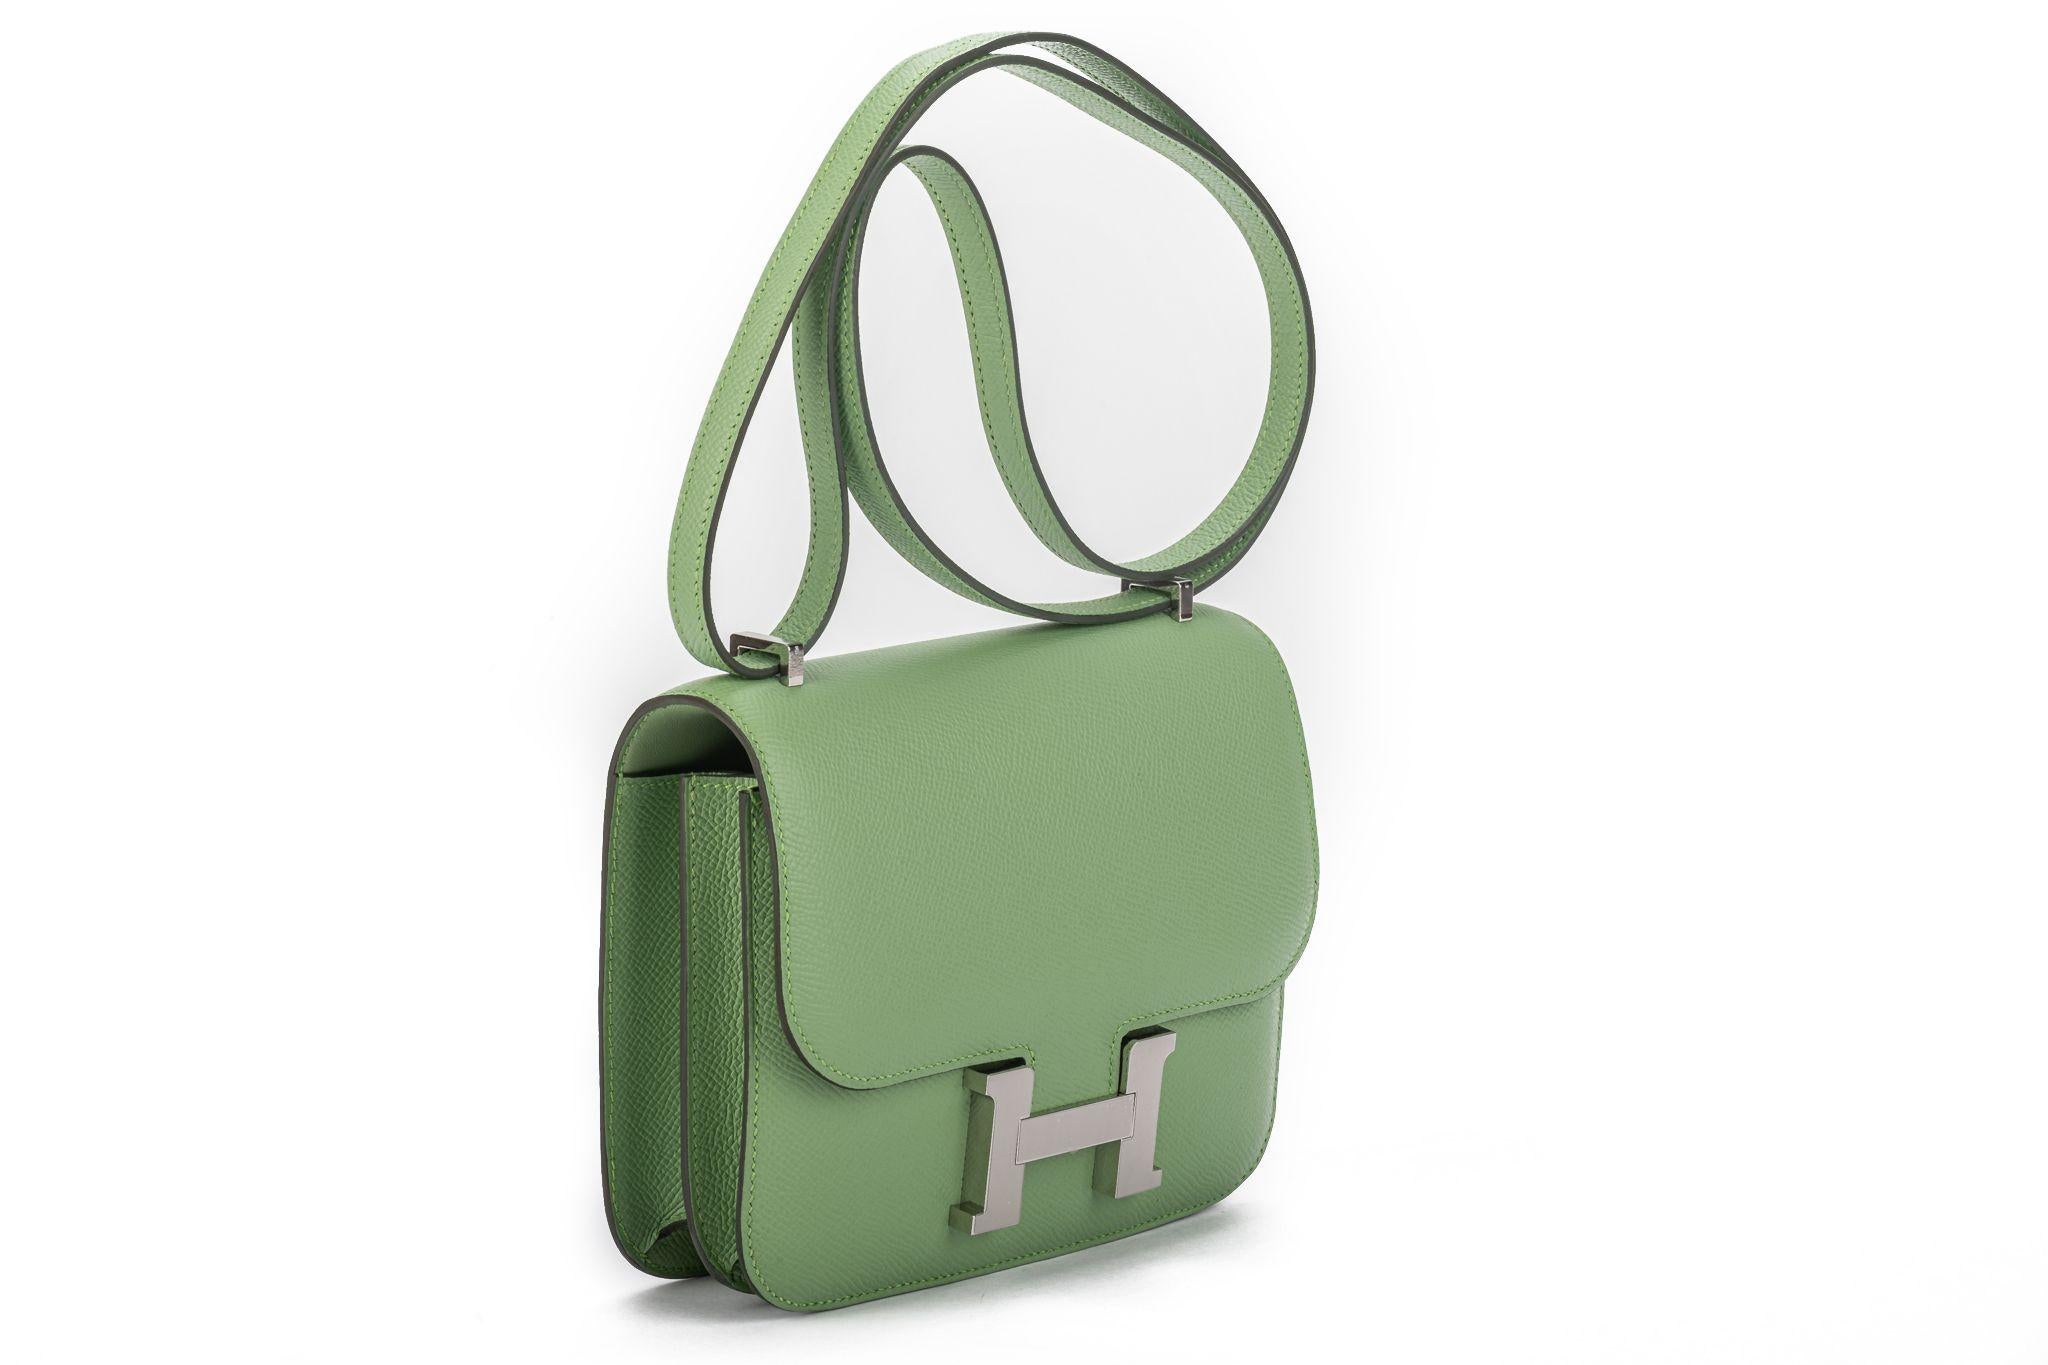 Hermes brand new in box Constance 18 in vert criquet epsom leather and palladium hardware.  Date stamp U for 2022. Brand new in box with felt, booklet, dust cover and box.